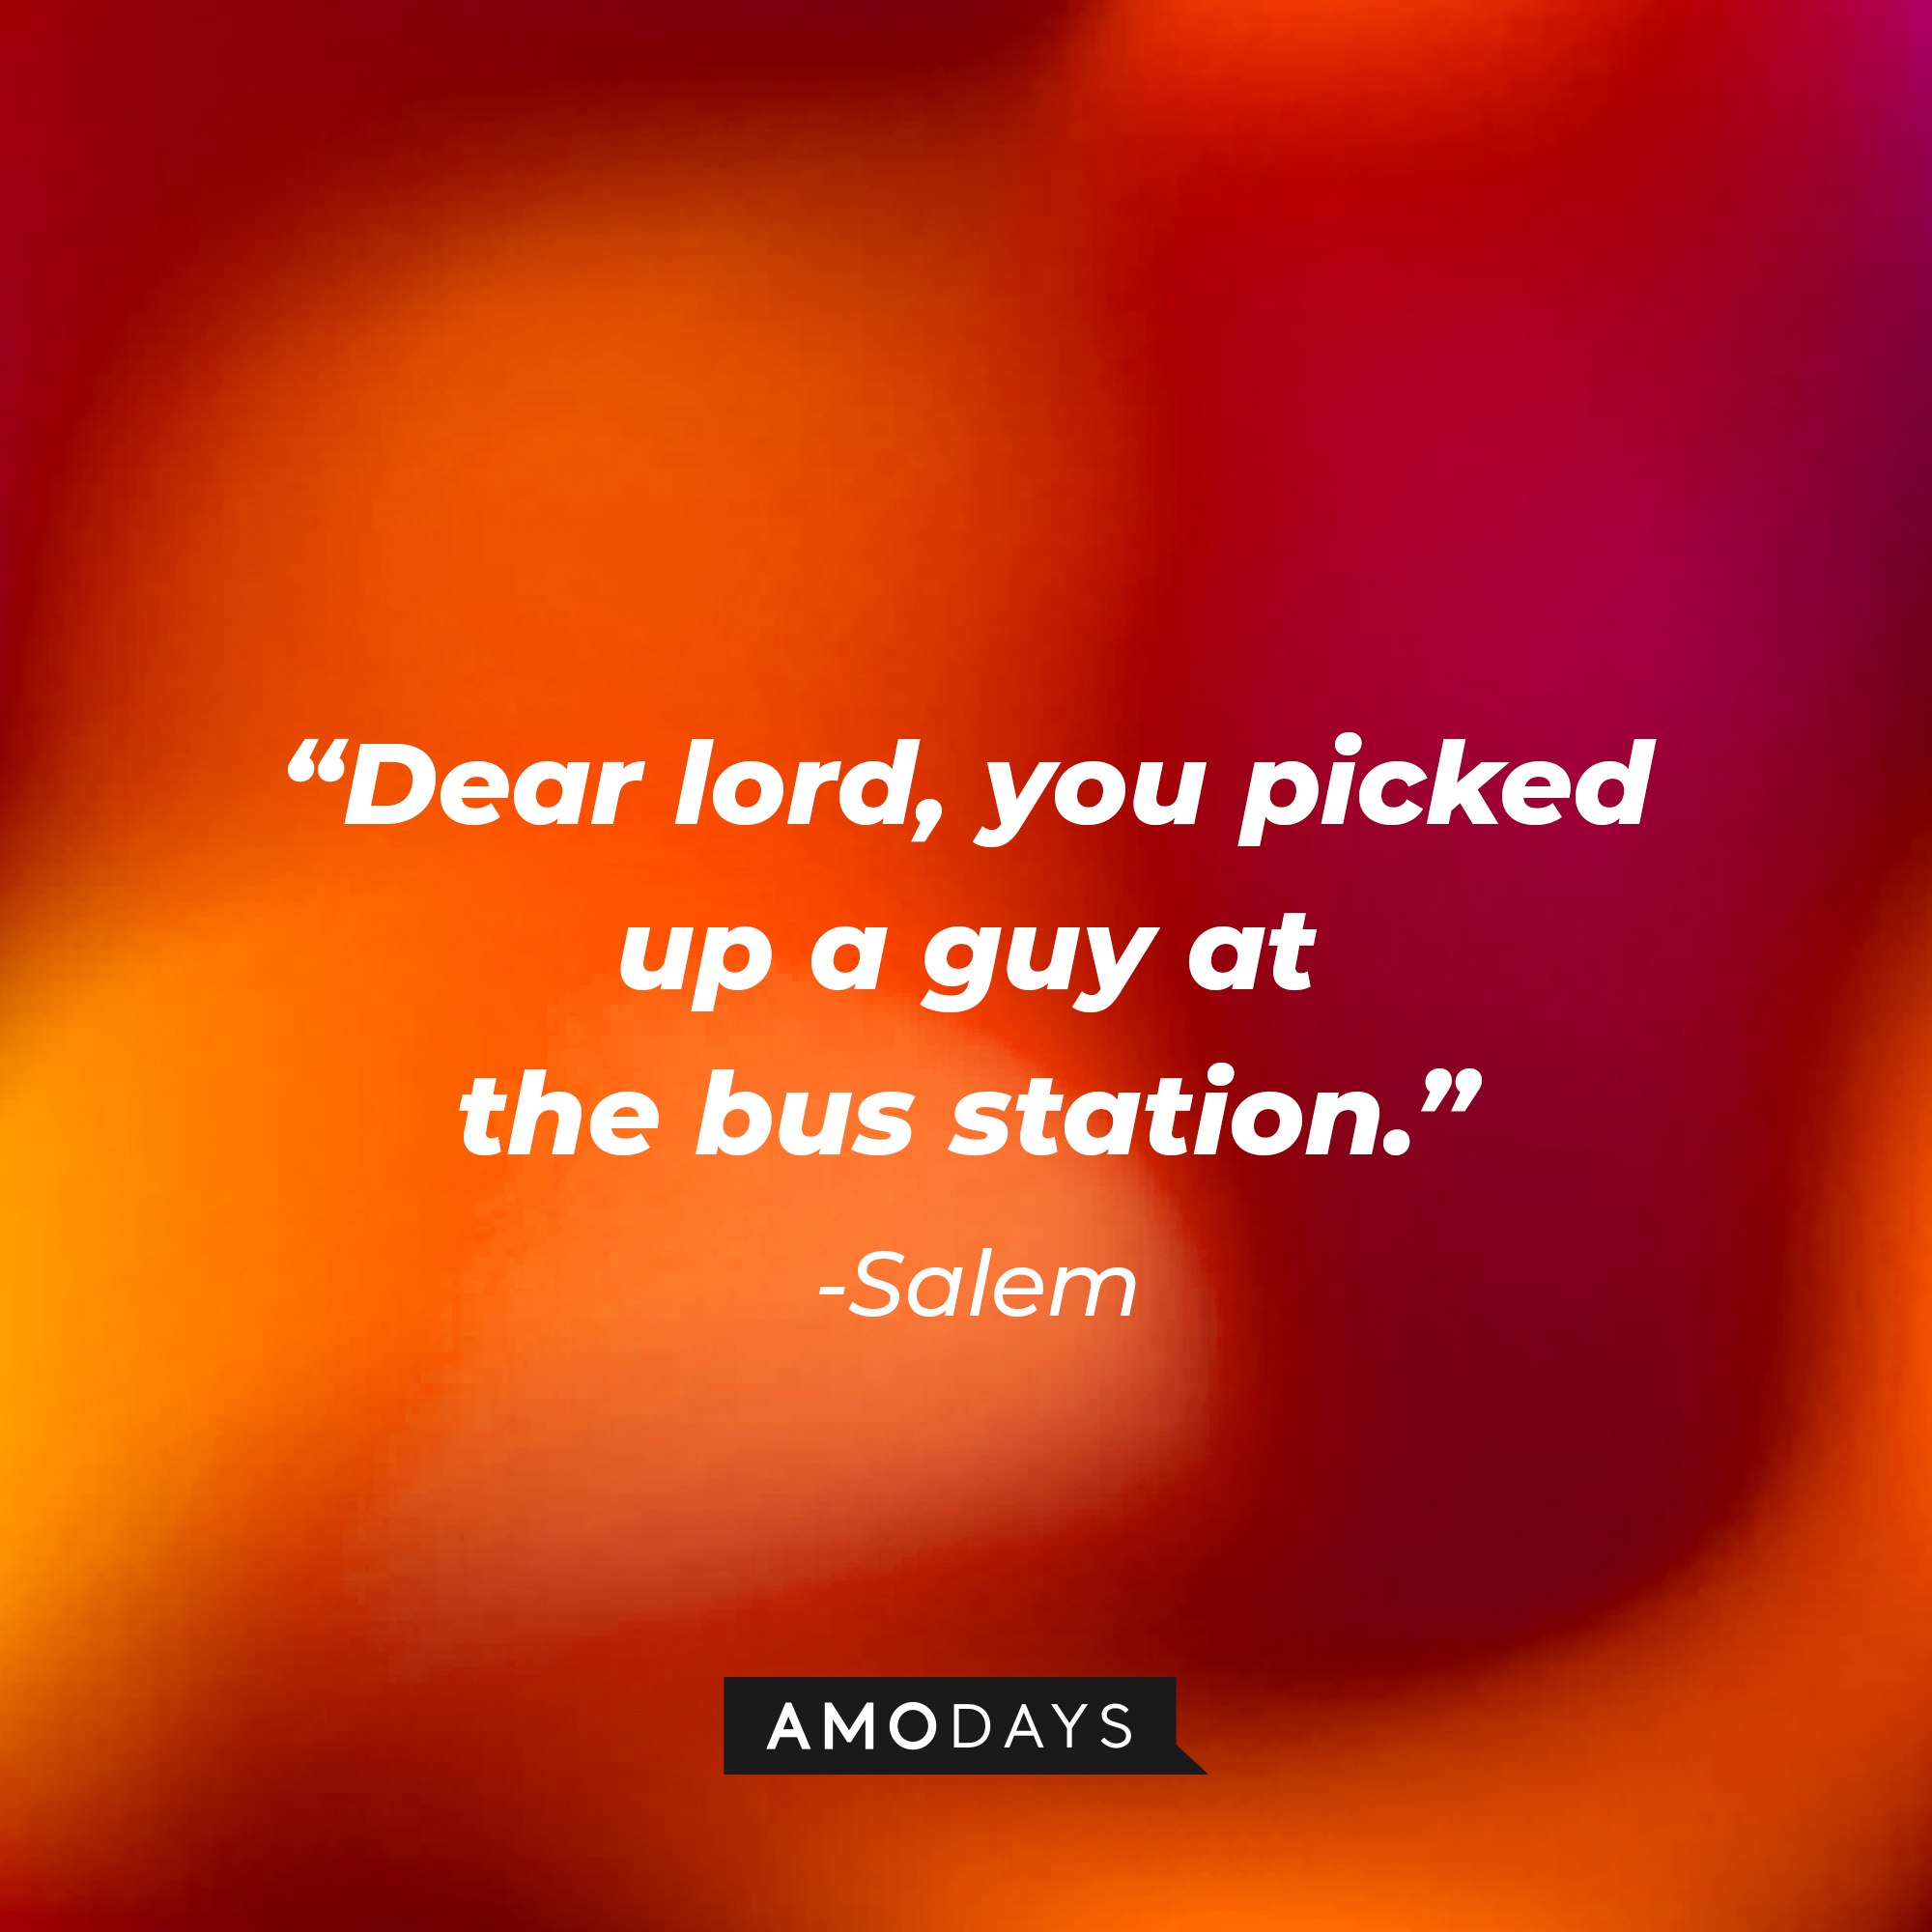 Salem’s quote: “Dear lord, you picked up a guy at the bus station.” | Source: AmoDays